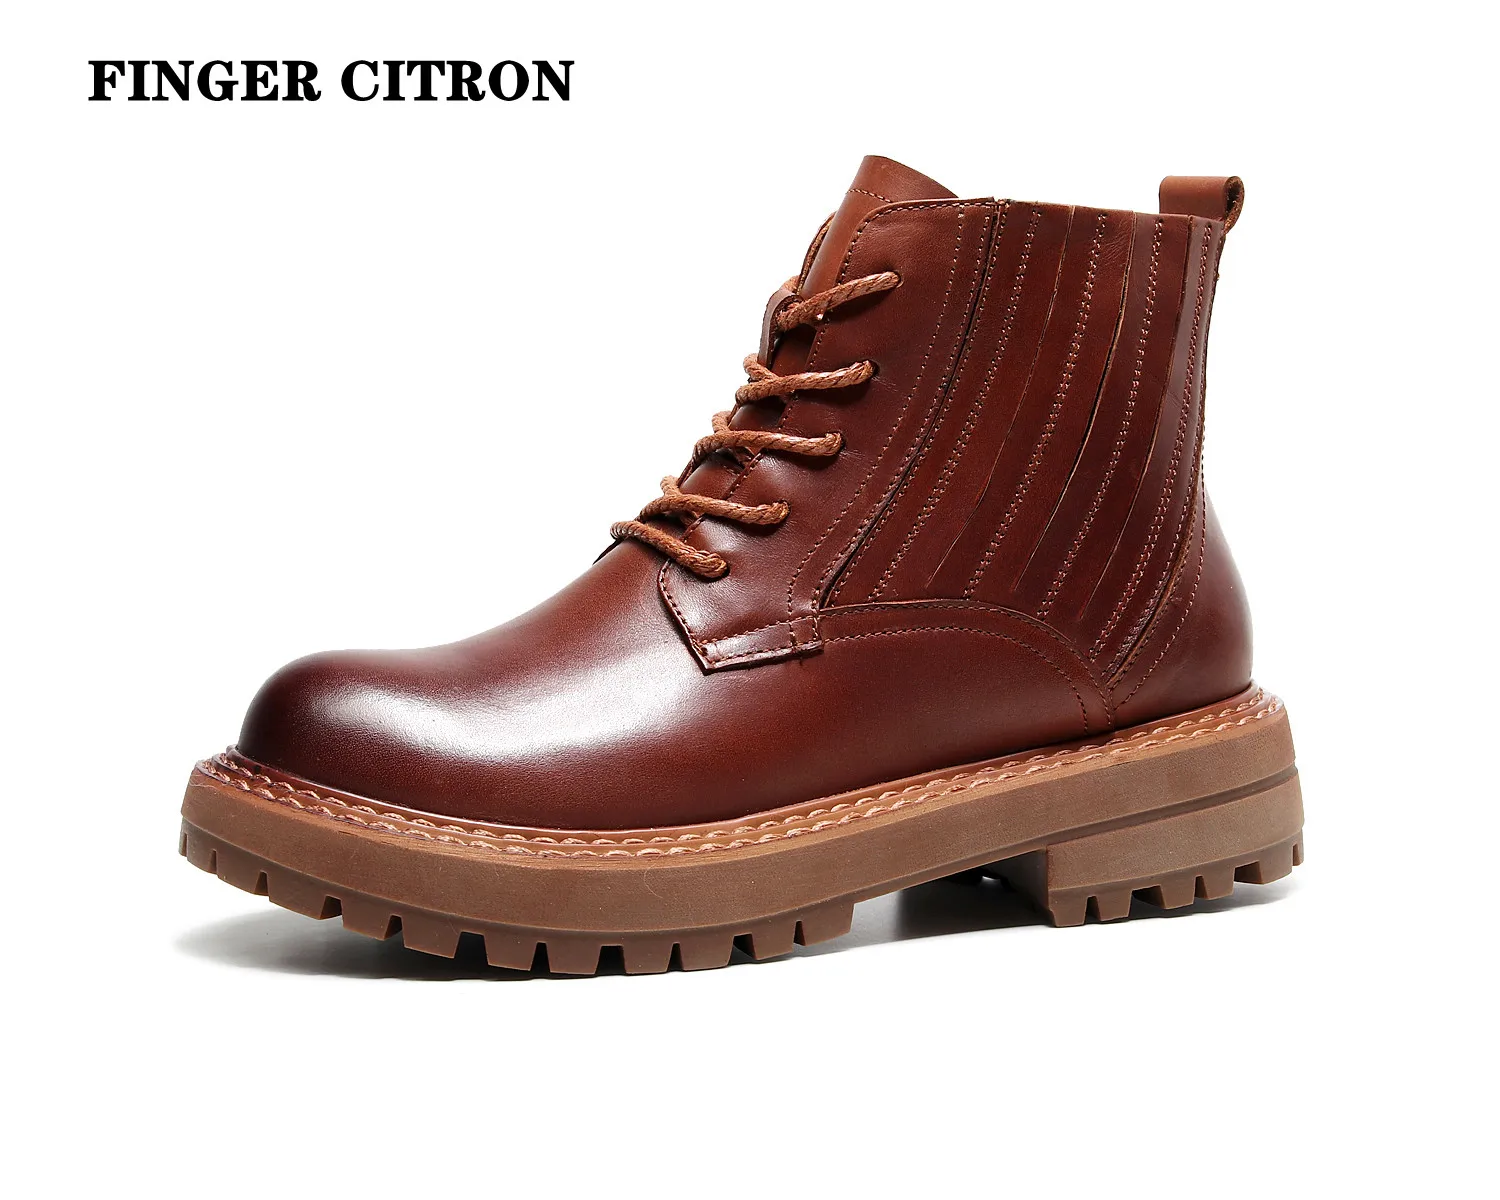 

Finger Citron Women Chelsea Anckle Boots Genuine Cow Leather Round Toe Platform Rubber Outsole By Handmade Lady style Size 35-42